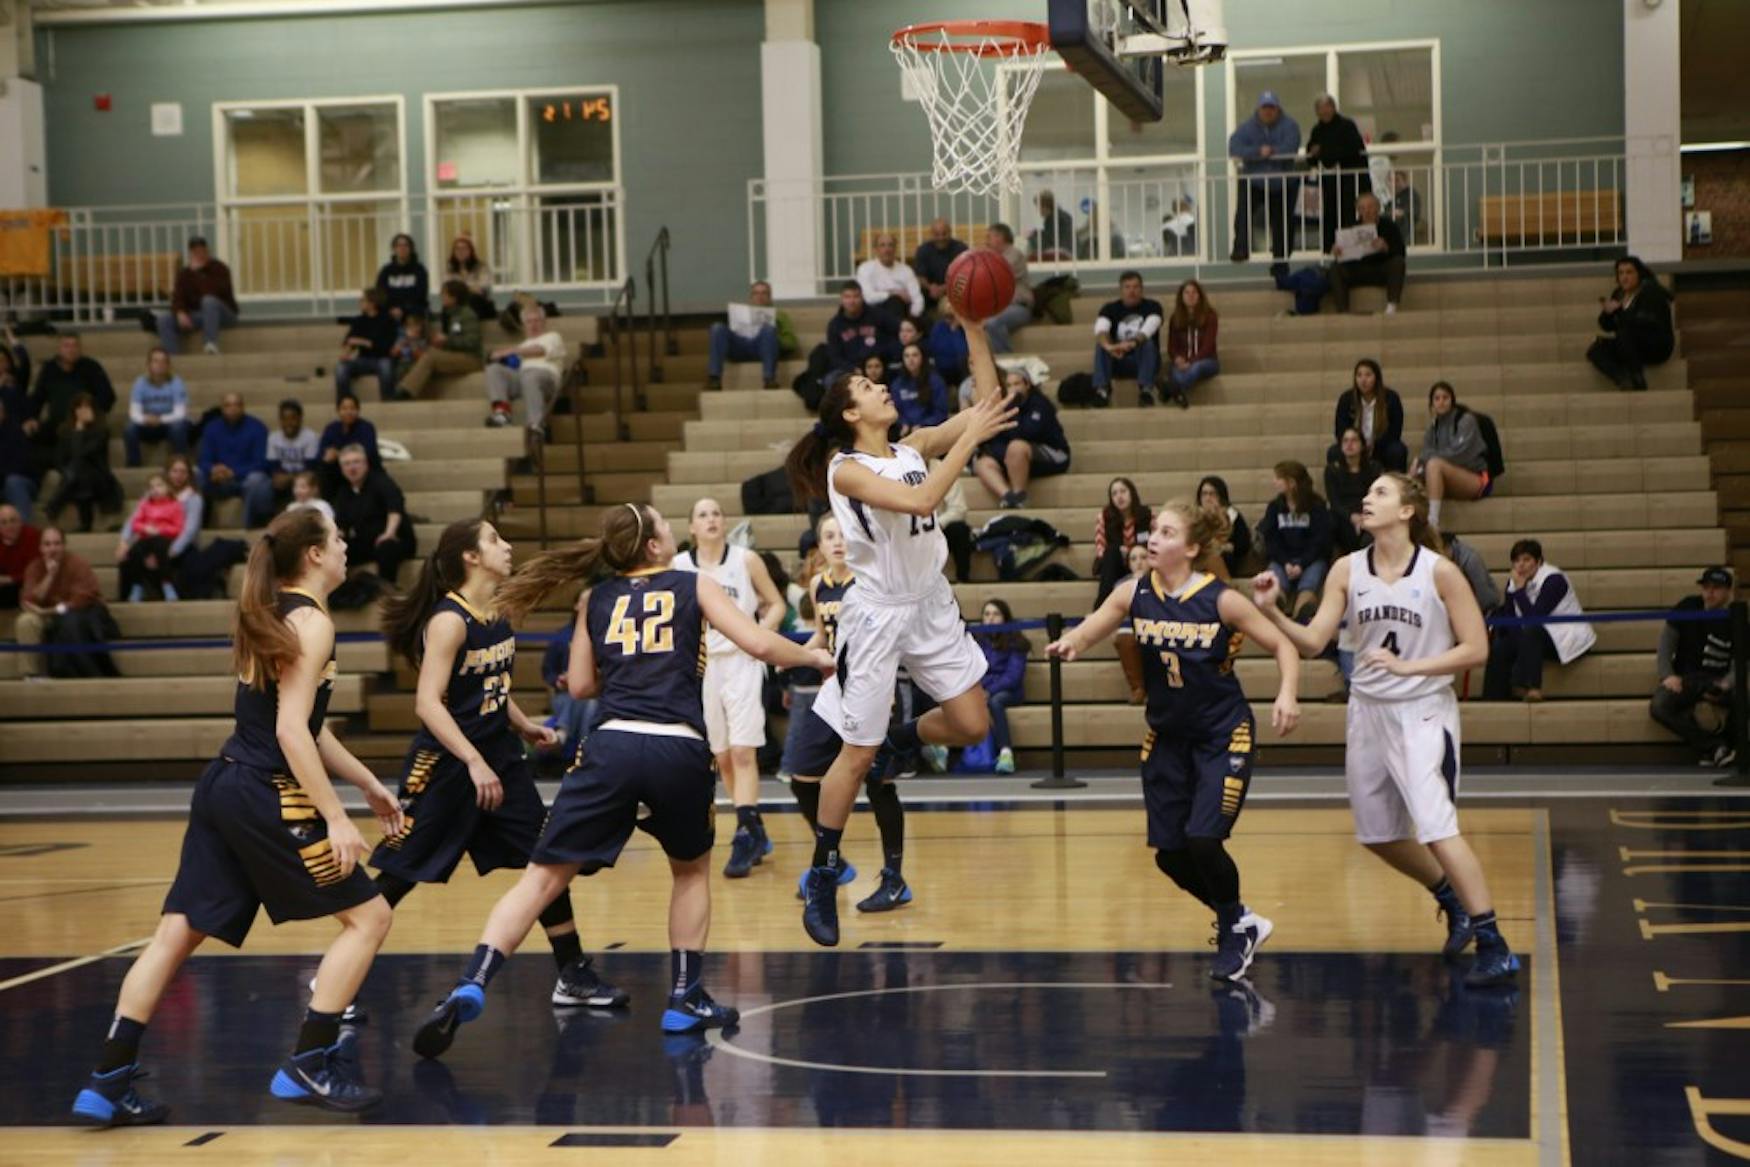 IN THE LANE: Guard Sydney Sodine ’17 drives to the basket in a 65-61 victory over Emory University on Jan 26.